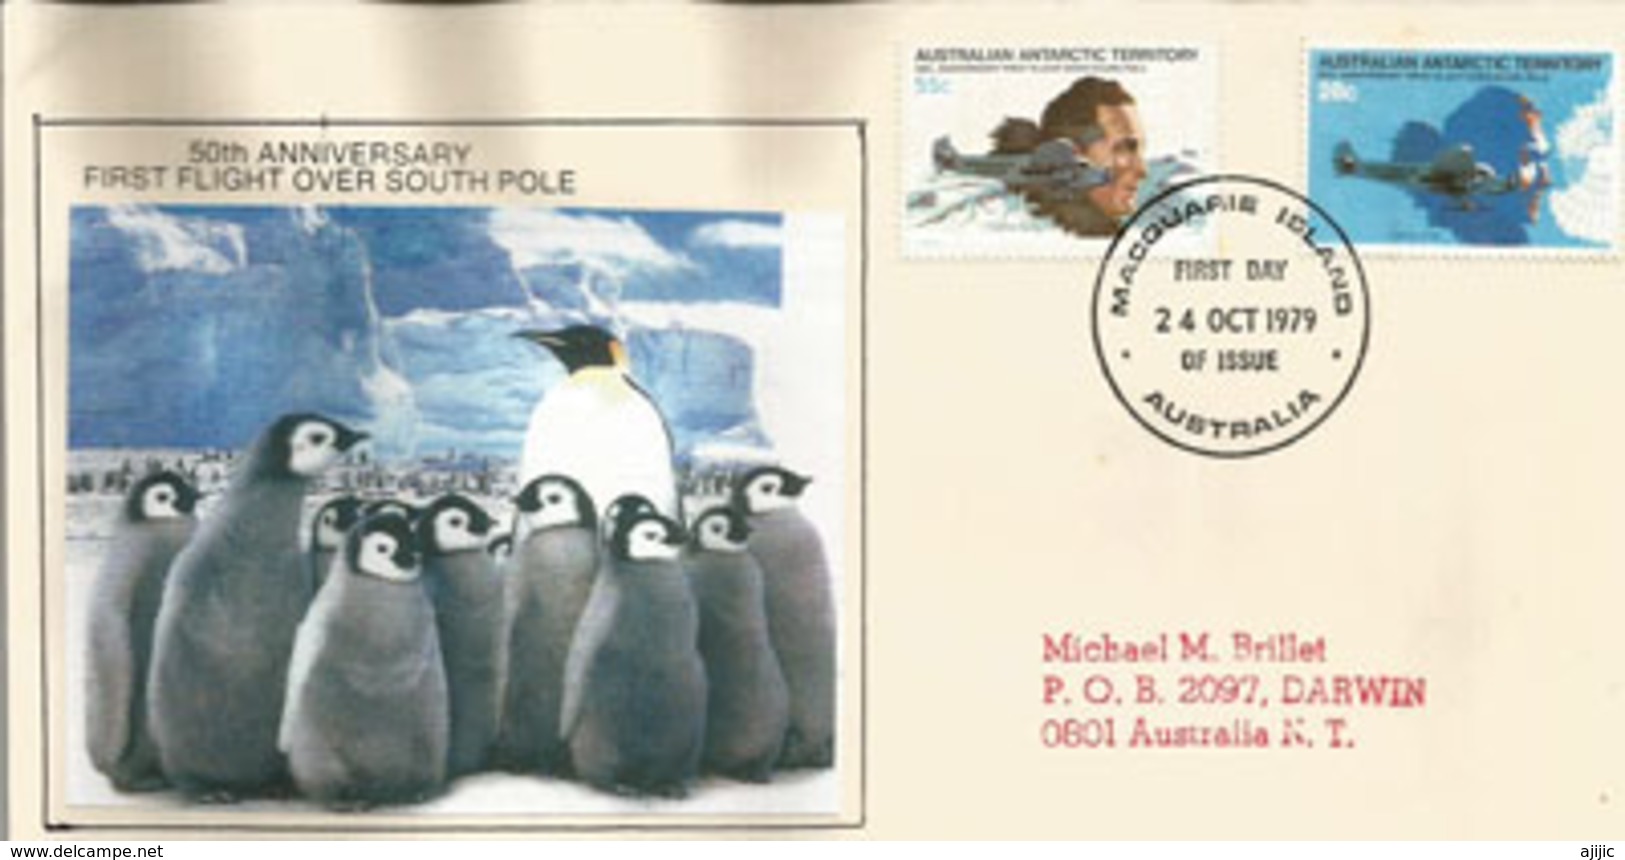 Amiral Byrd, First Flight Over South-Pole & Antarctica In 1929,special Cover 50th Anniversary, Canceled Macquarie Island - Premiers Vols